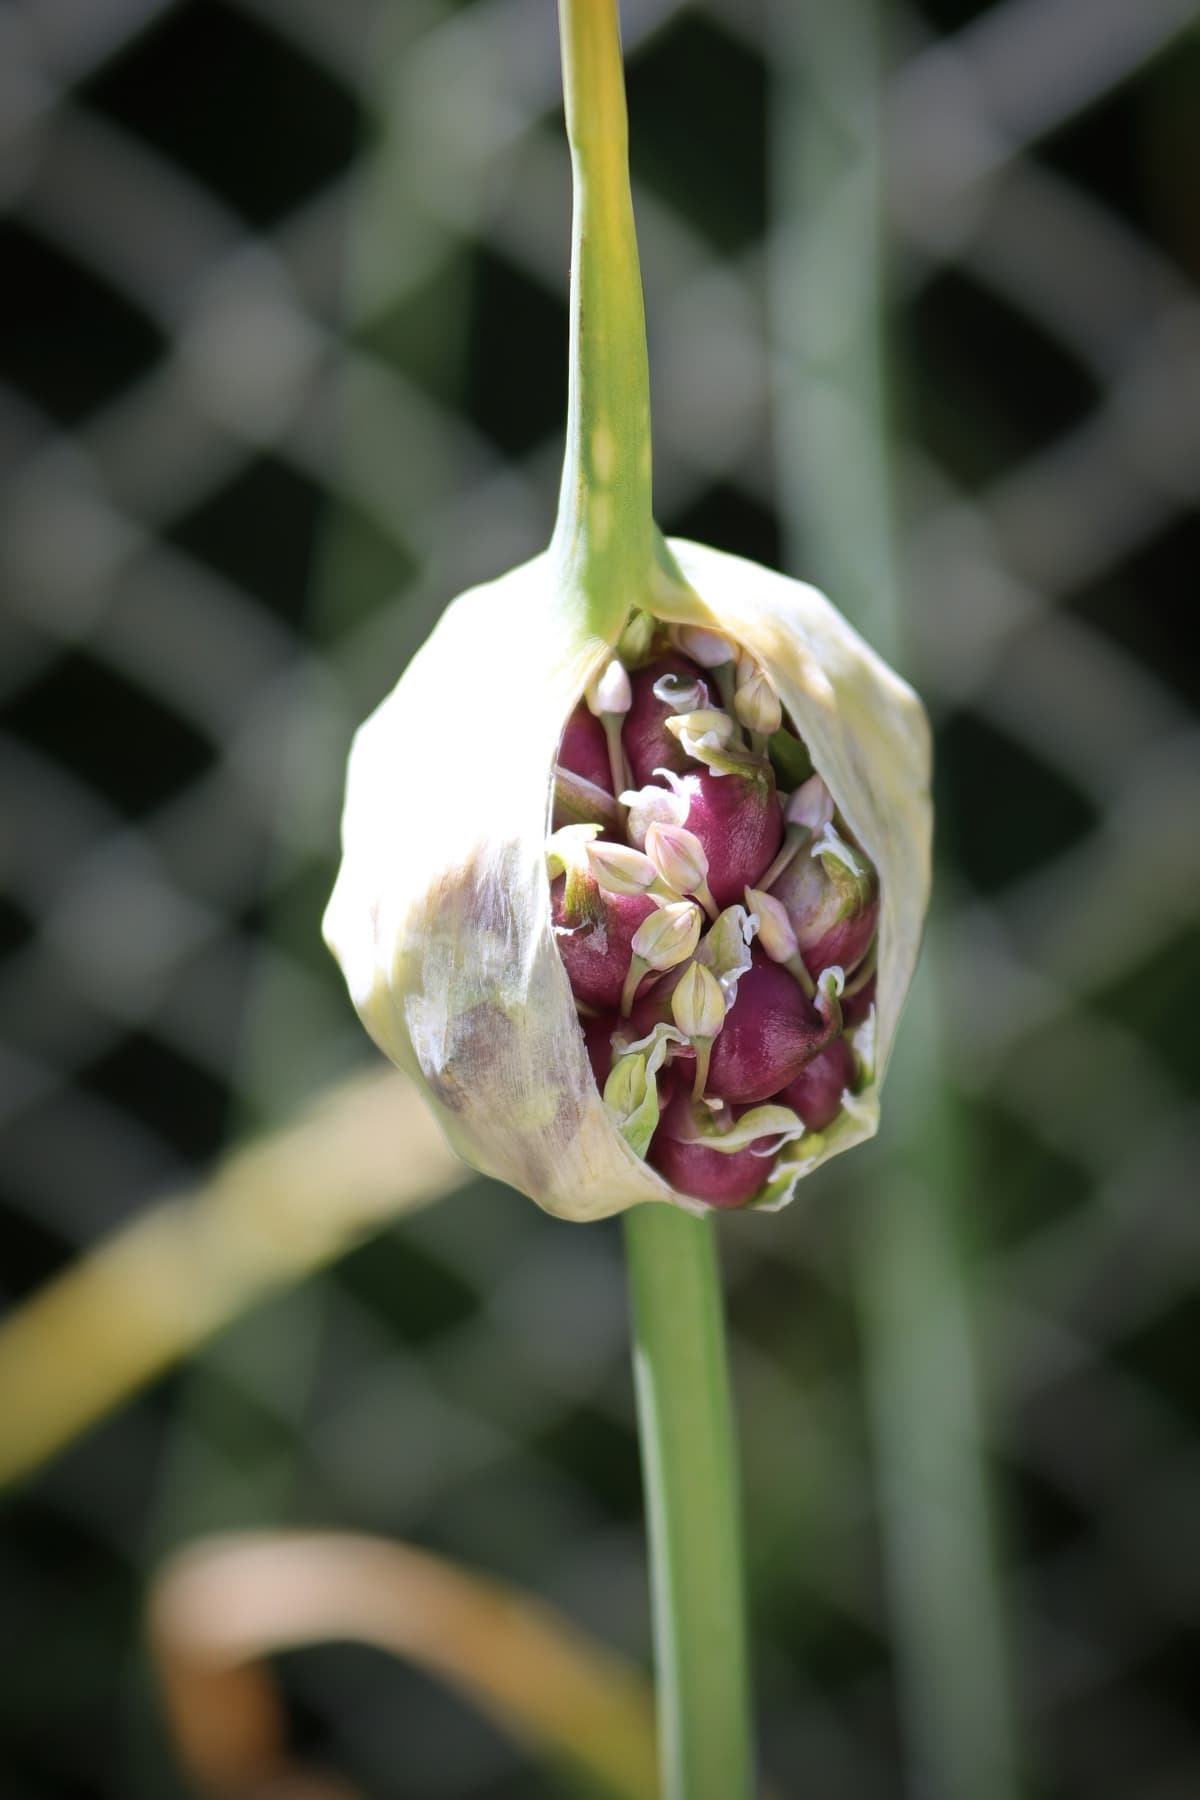 garlic scape developing flowers and seeds